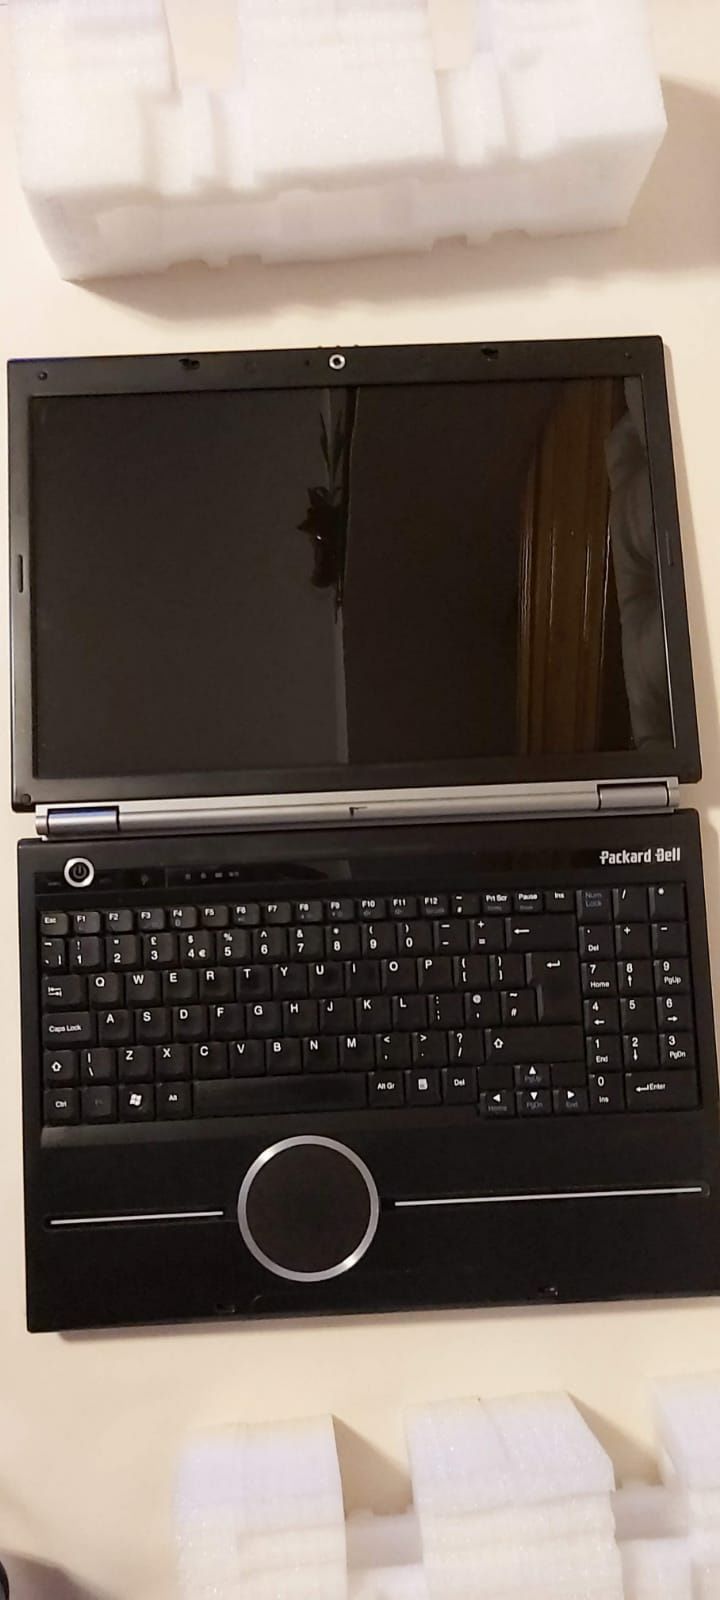 Laptop Packard Bell EasyNote MB85 T7700, SSD 240 GB